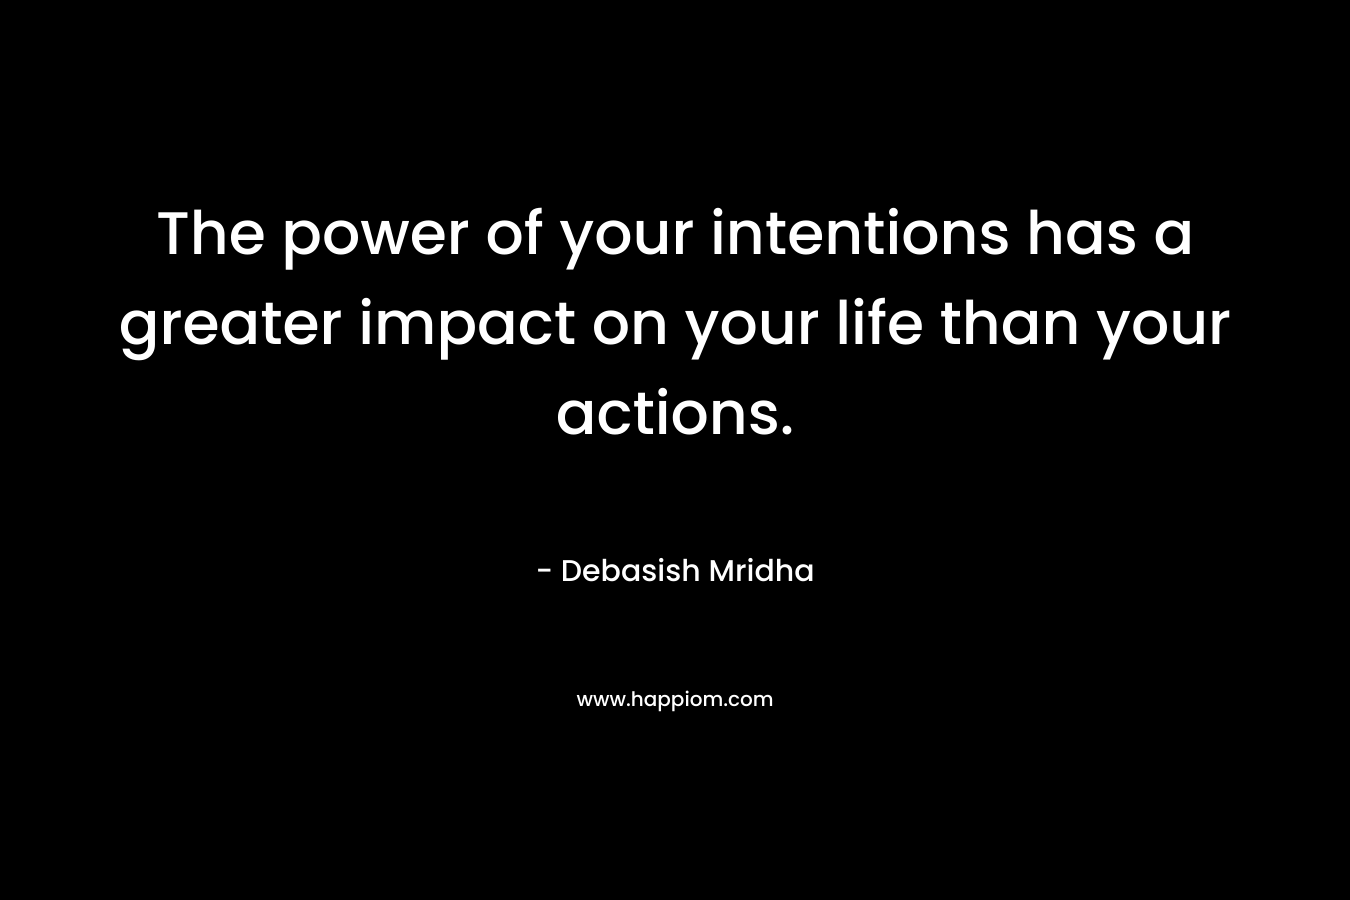 The power of your intentions has a greater impact on your life than your actions.